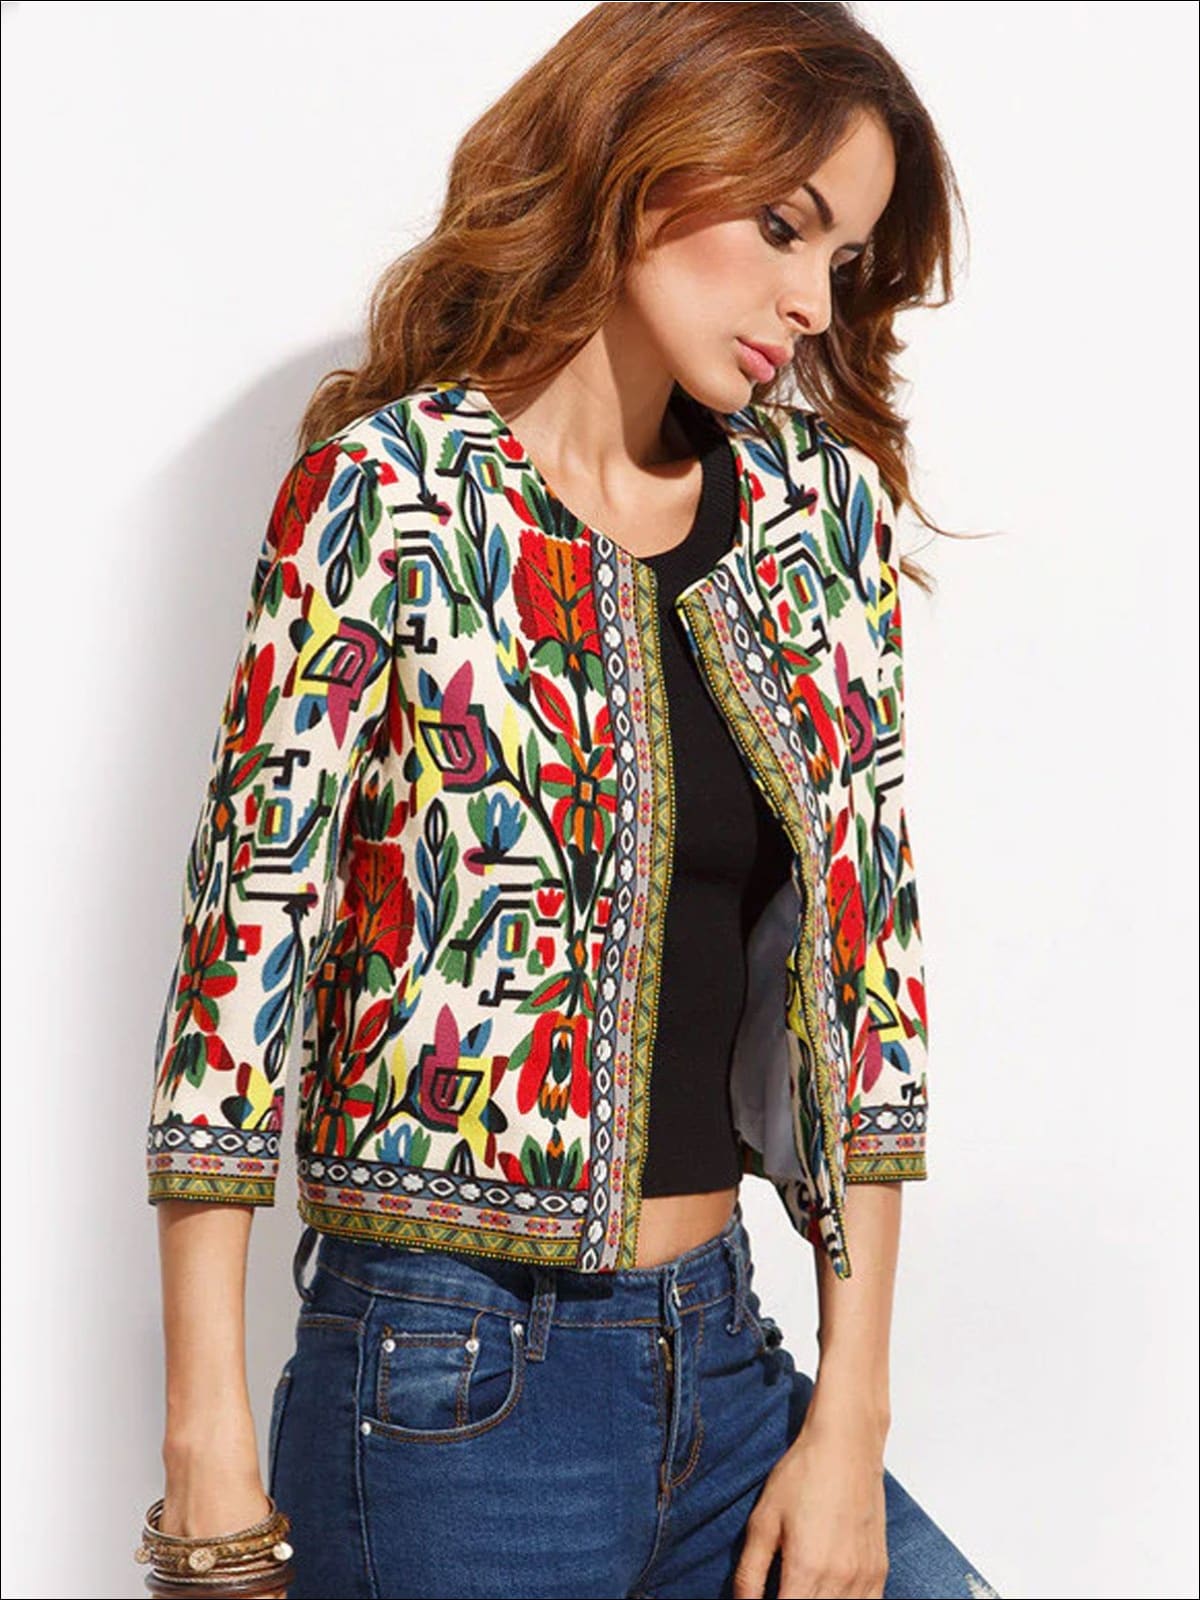 Women's Embroidered Tribal Print Jacket – Mia Belle Girls